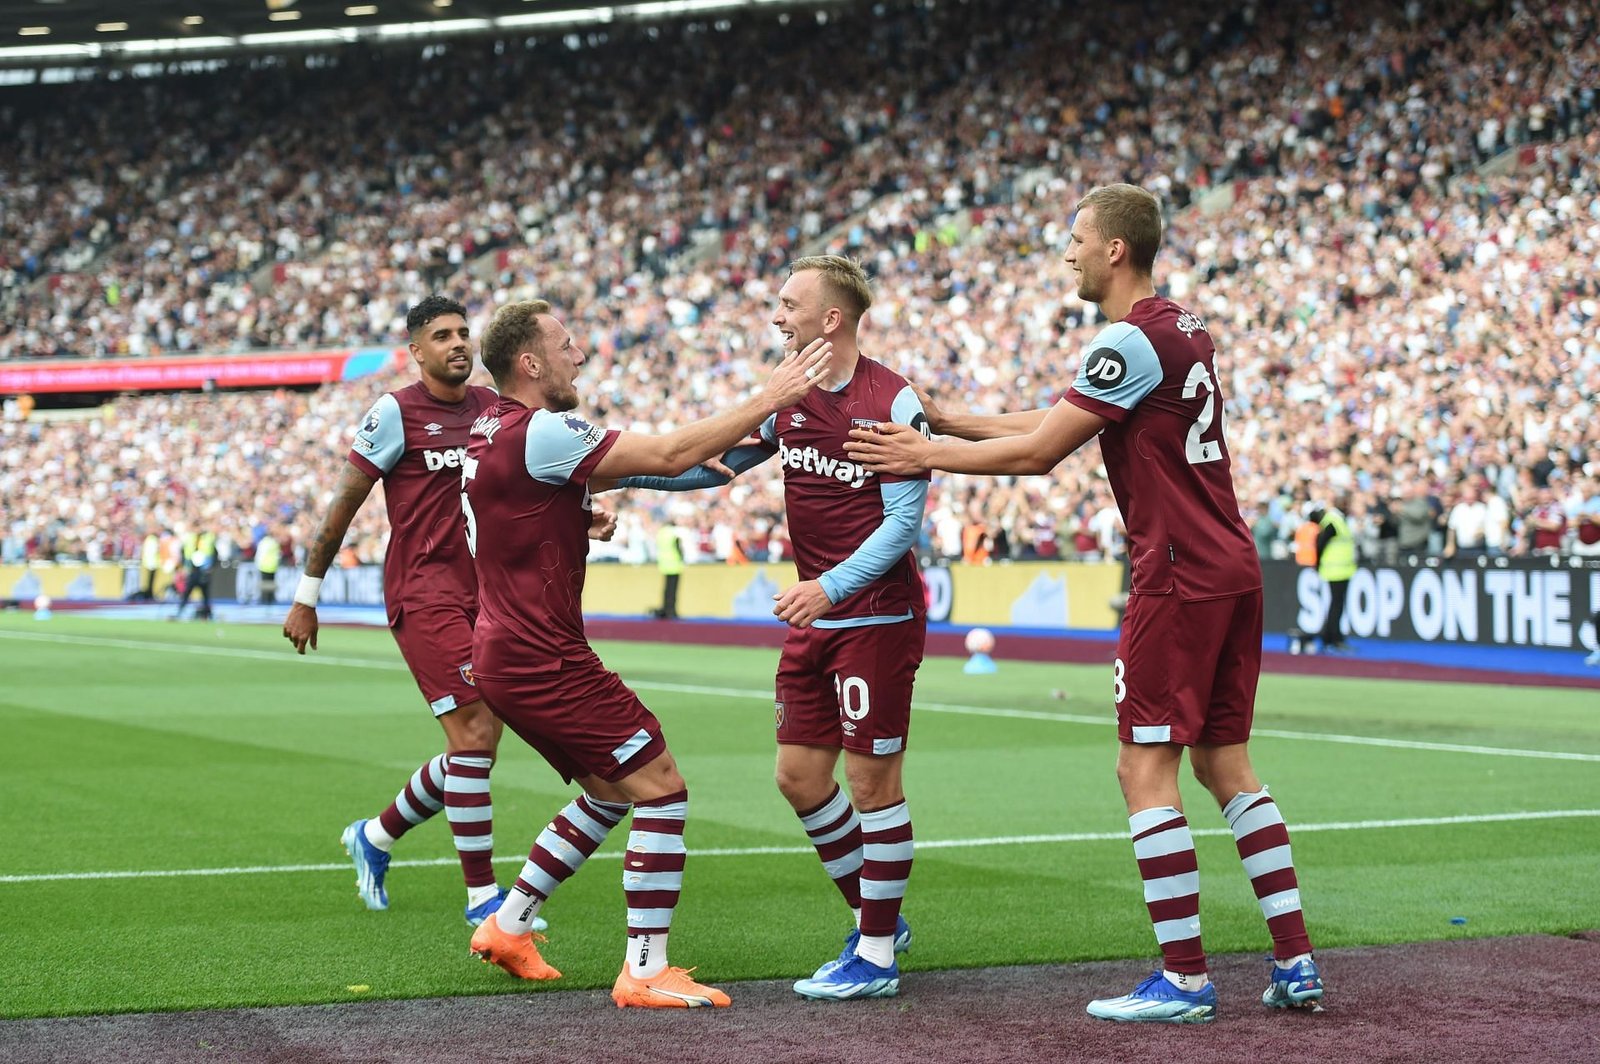 Sheffield United vs West Ham United Prediction and Betting Tips